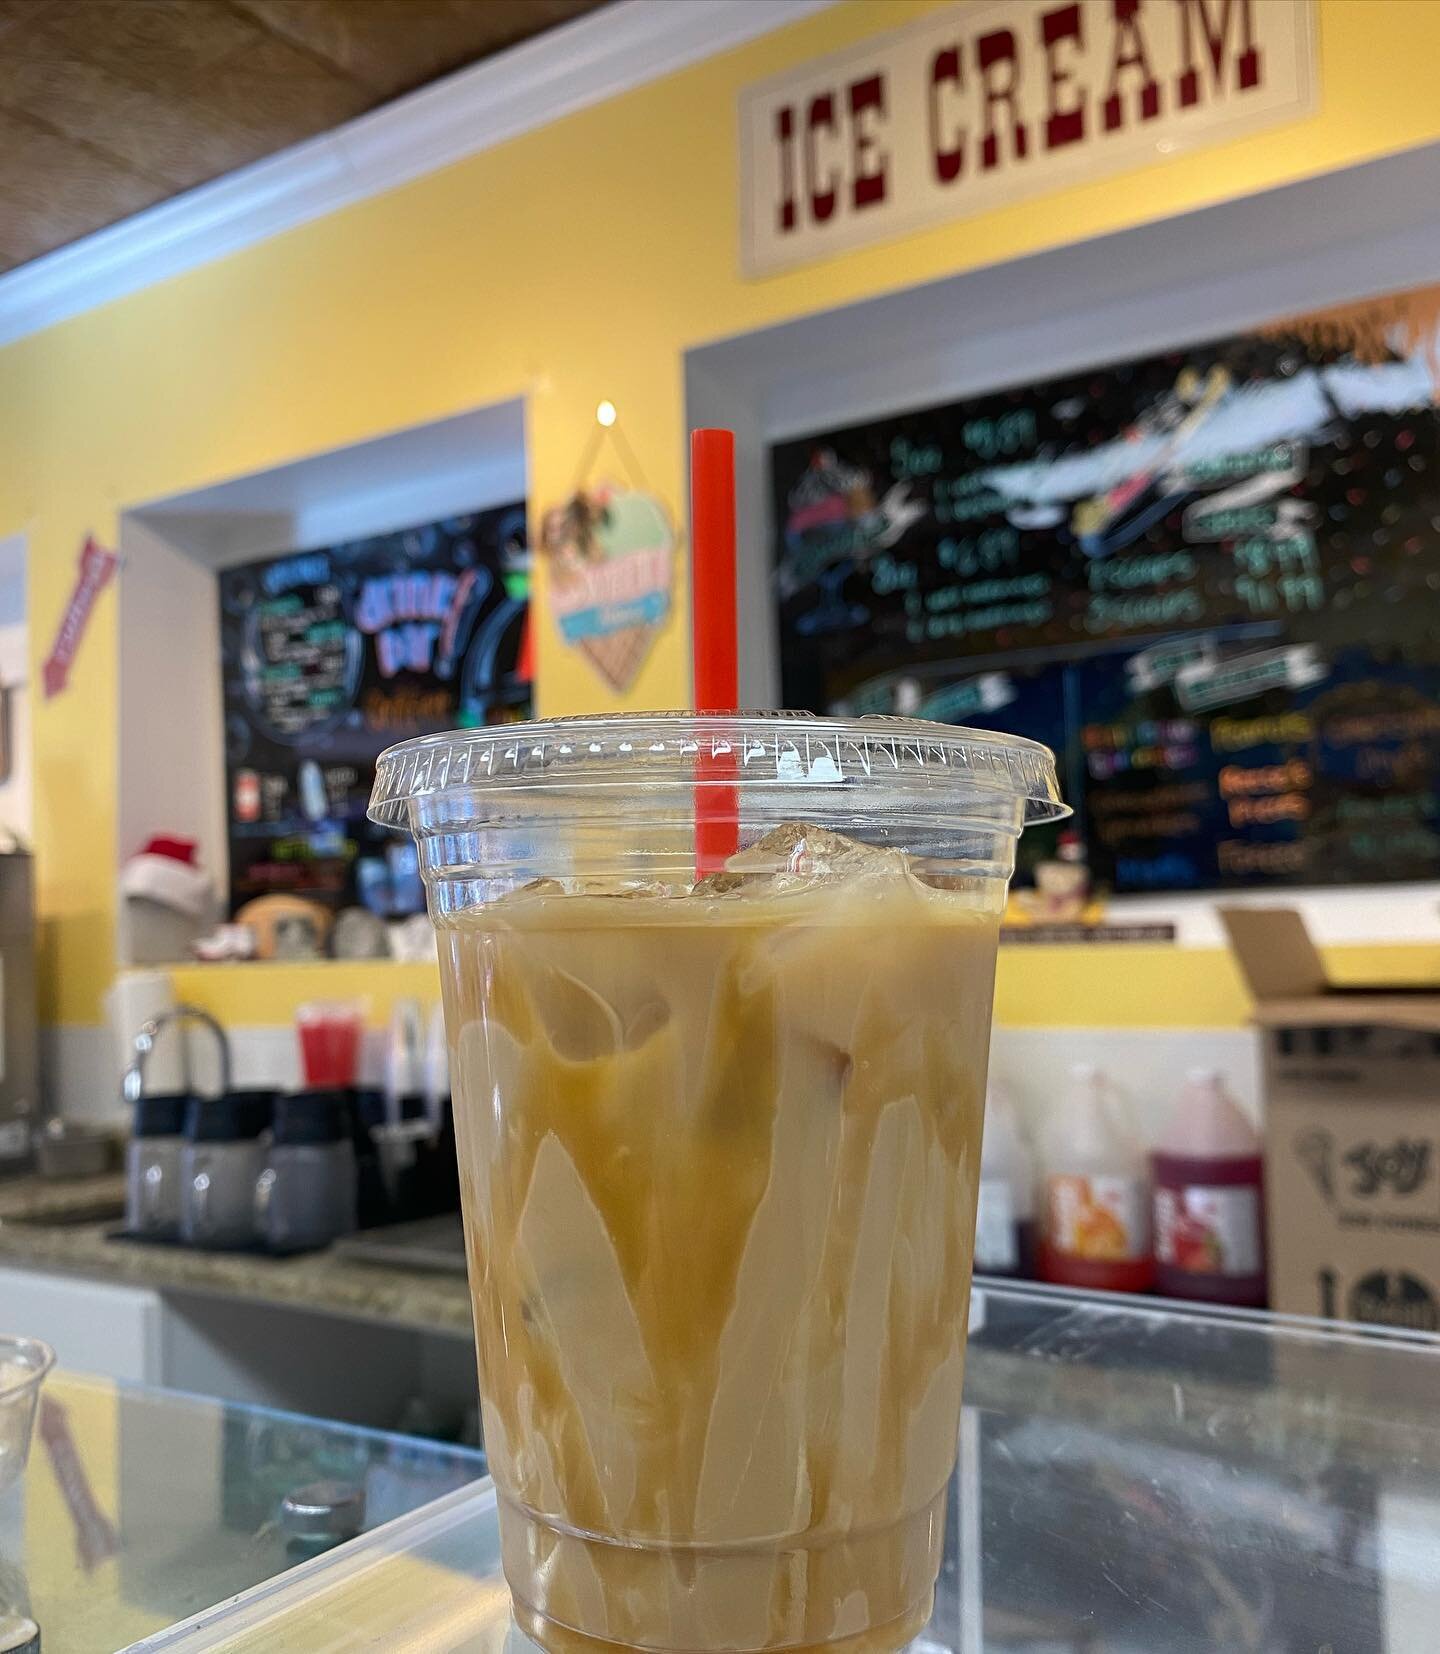 We&rsquo;re a one stop shop! Coffee (local of course), tea, sodas and more! Our wide variety of options ensures we have a treat for everyone. Treat yourself to Abner B&rsquo;s today! 🍦☕️🫖

#fredericksburg #goodeats #icecream #abnerb #hotcoca #fxbg 